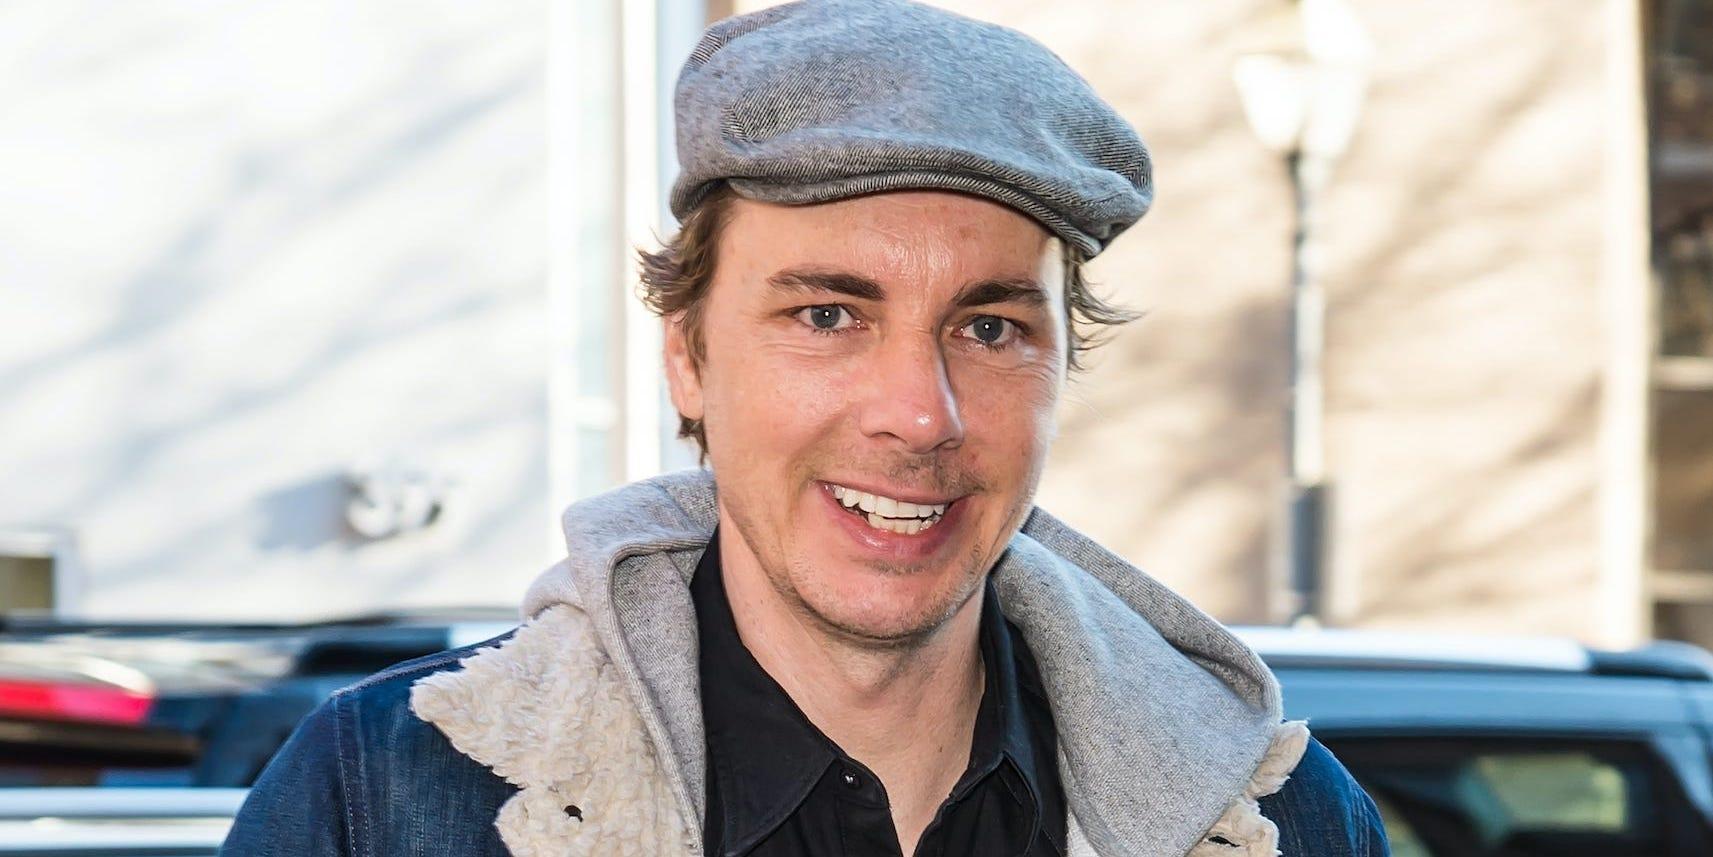 Dax Shepard Said He Relapsed After Being Sober For 16 Years